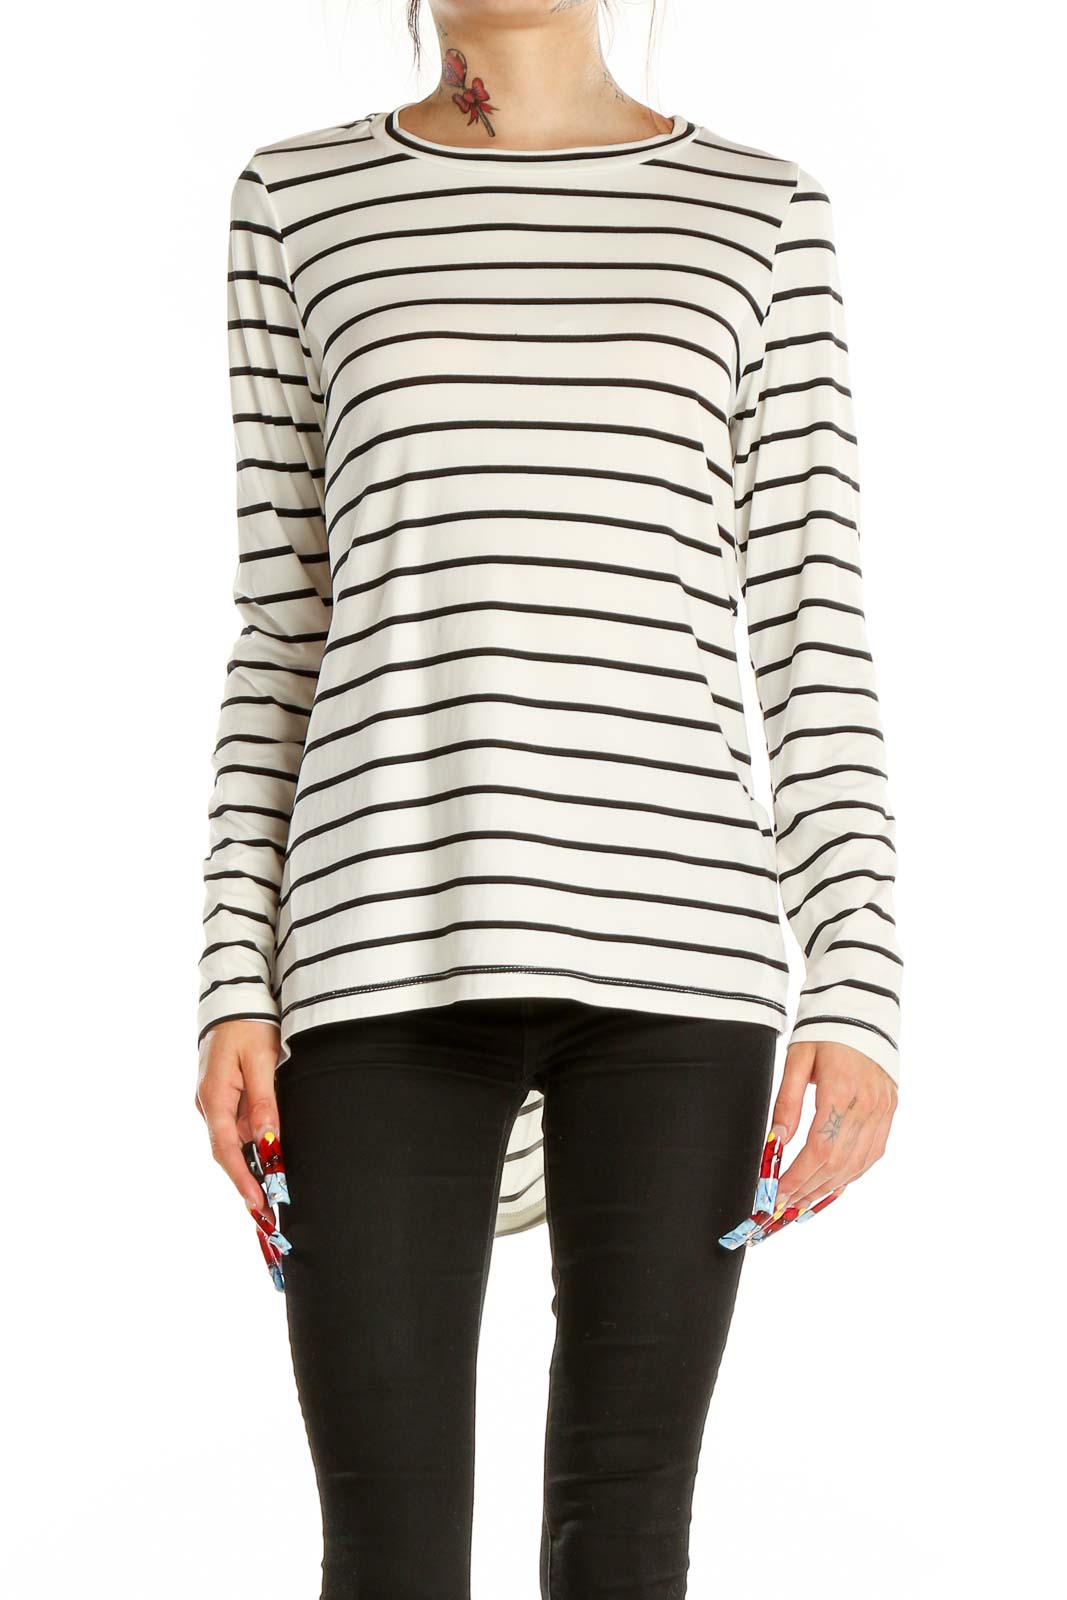 White Black Striped Casual Shirt Front